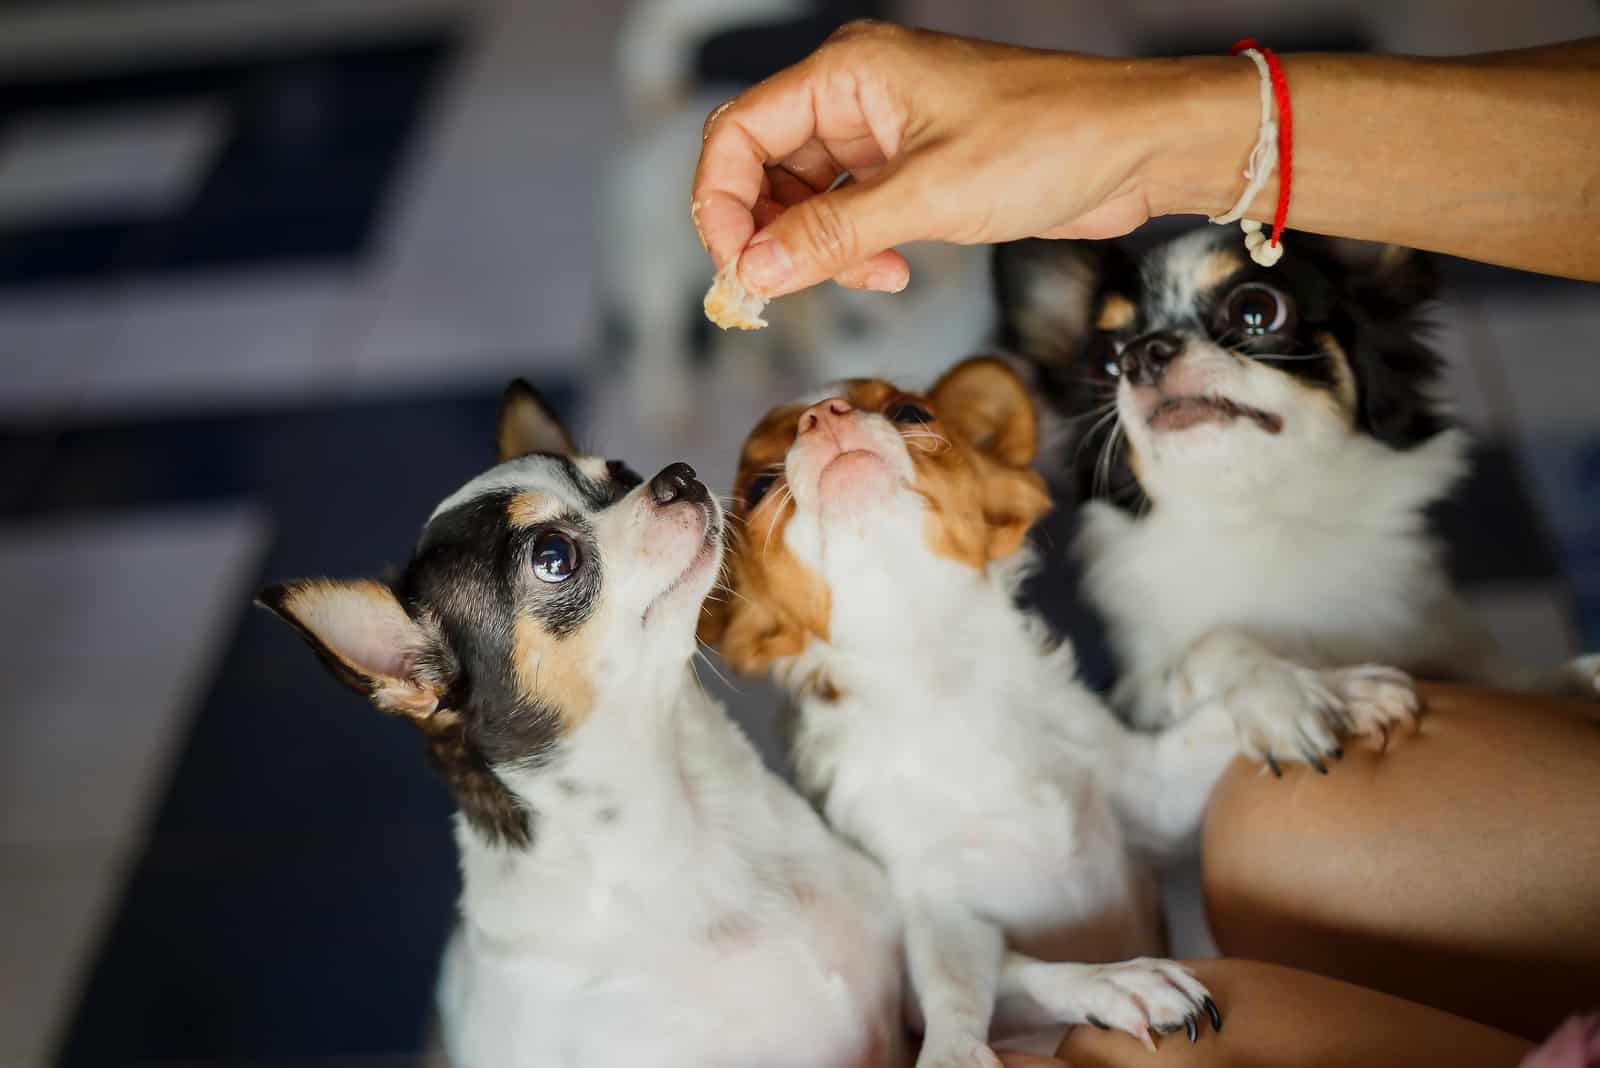 owner feeding treats to dogs